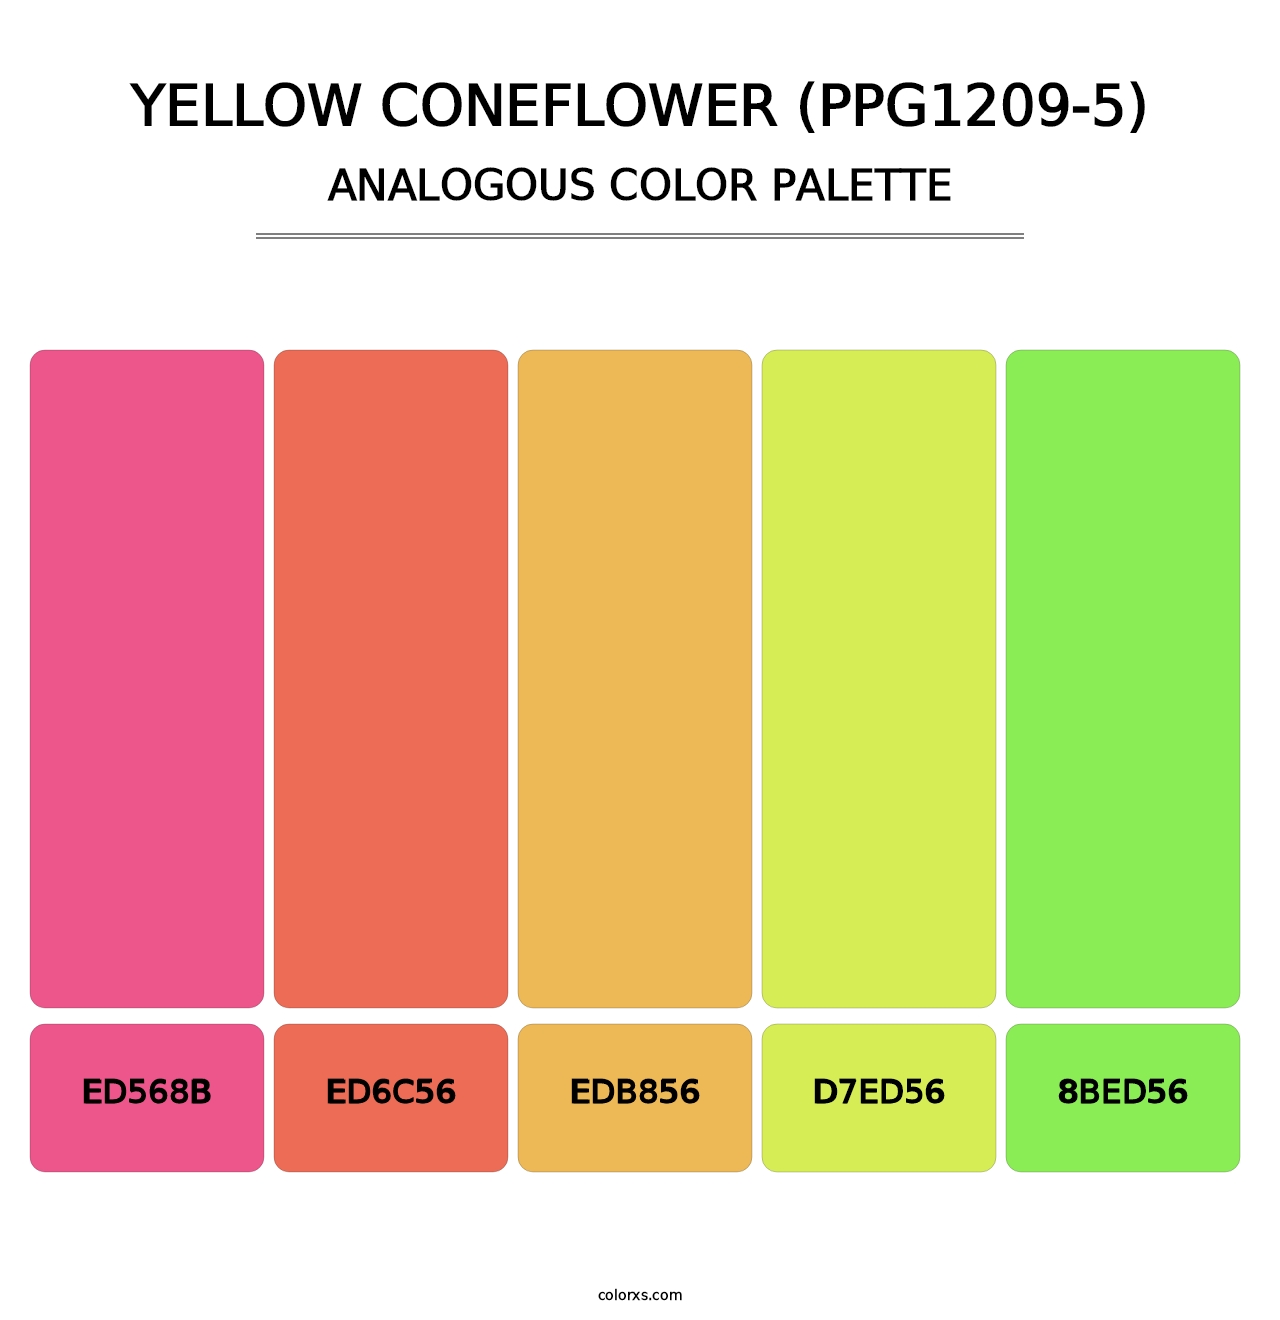 Yellow Coneflower (PPG1209-5) - Analogous Color Palette